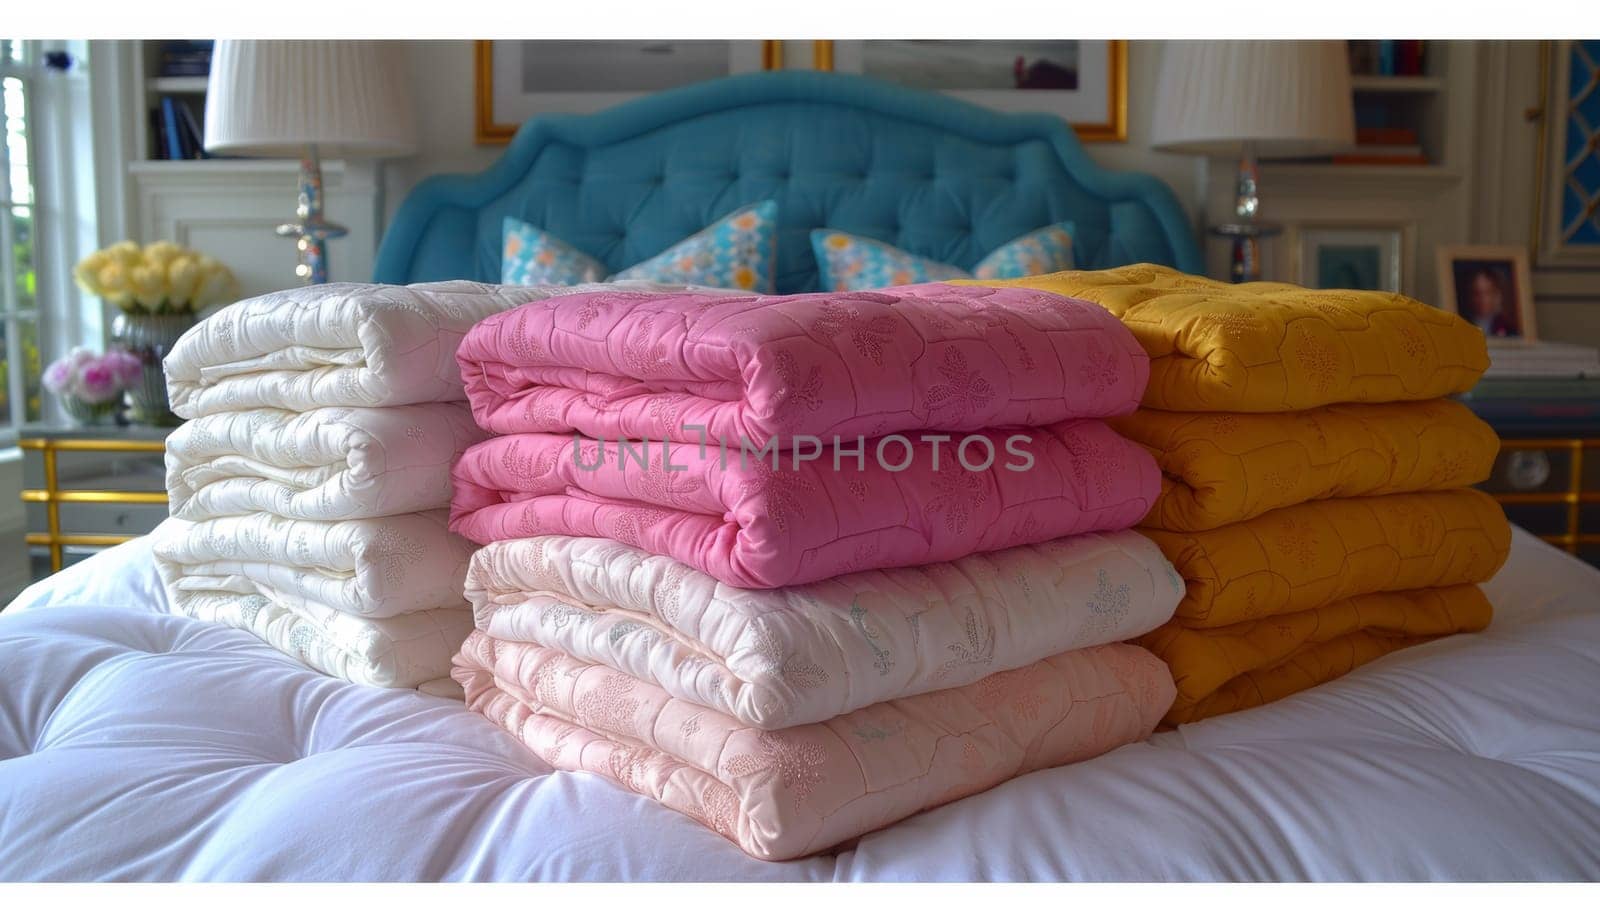 A stack of folded towels on a bed in front of blue and yellow pillows